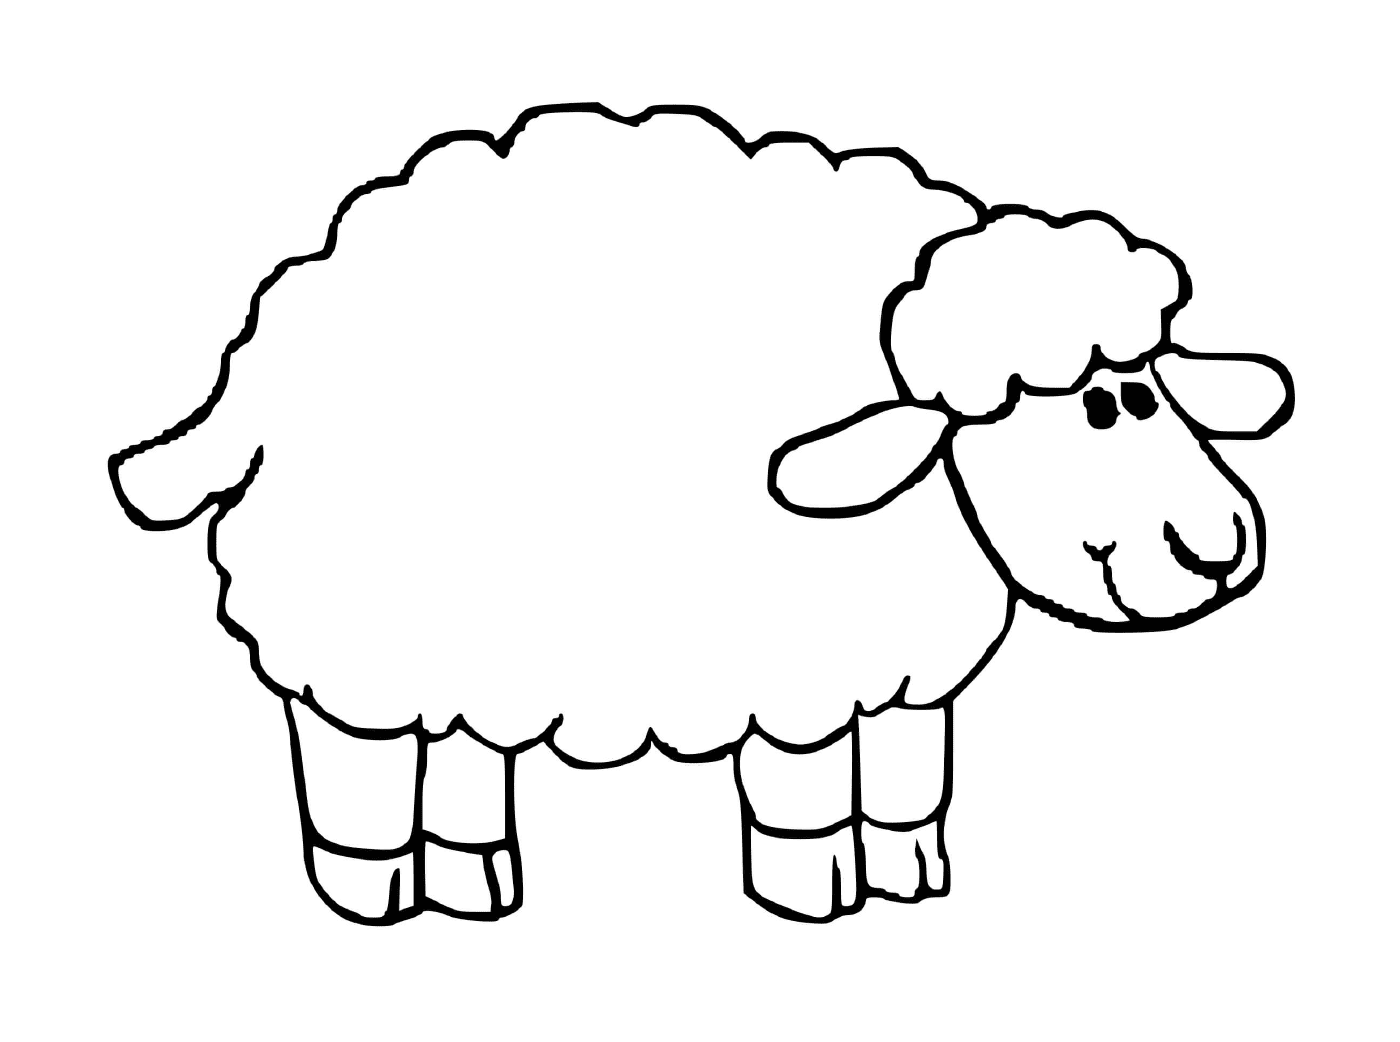  Sheep of friendly appearance 